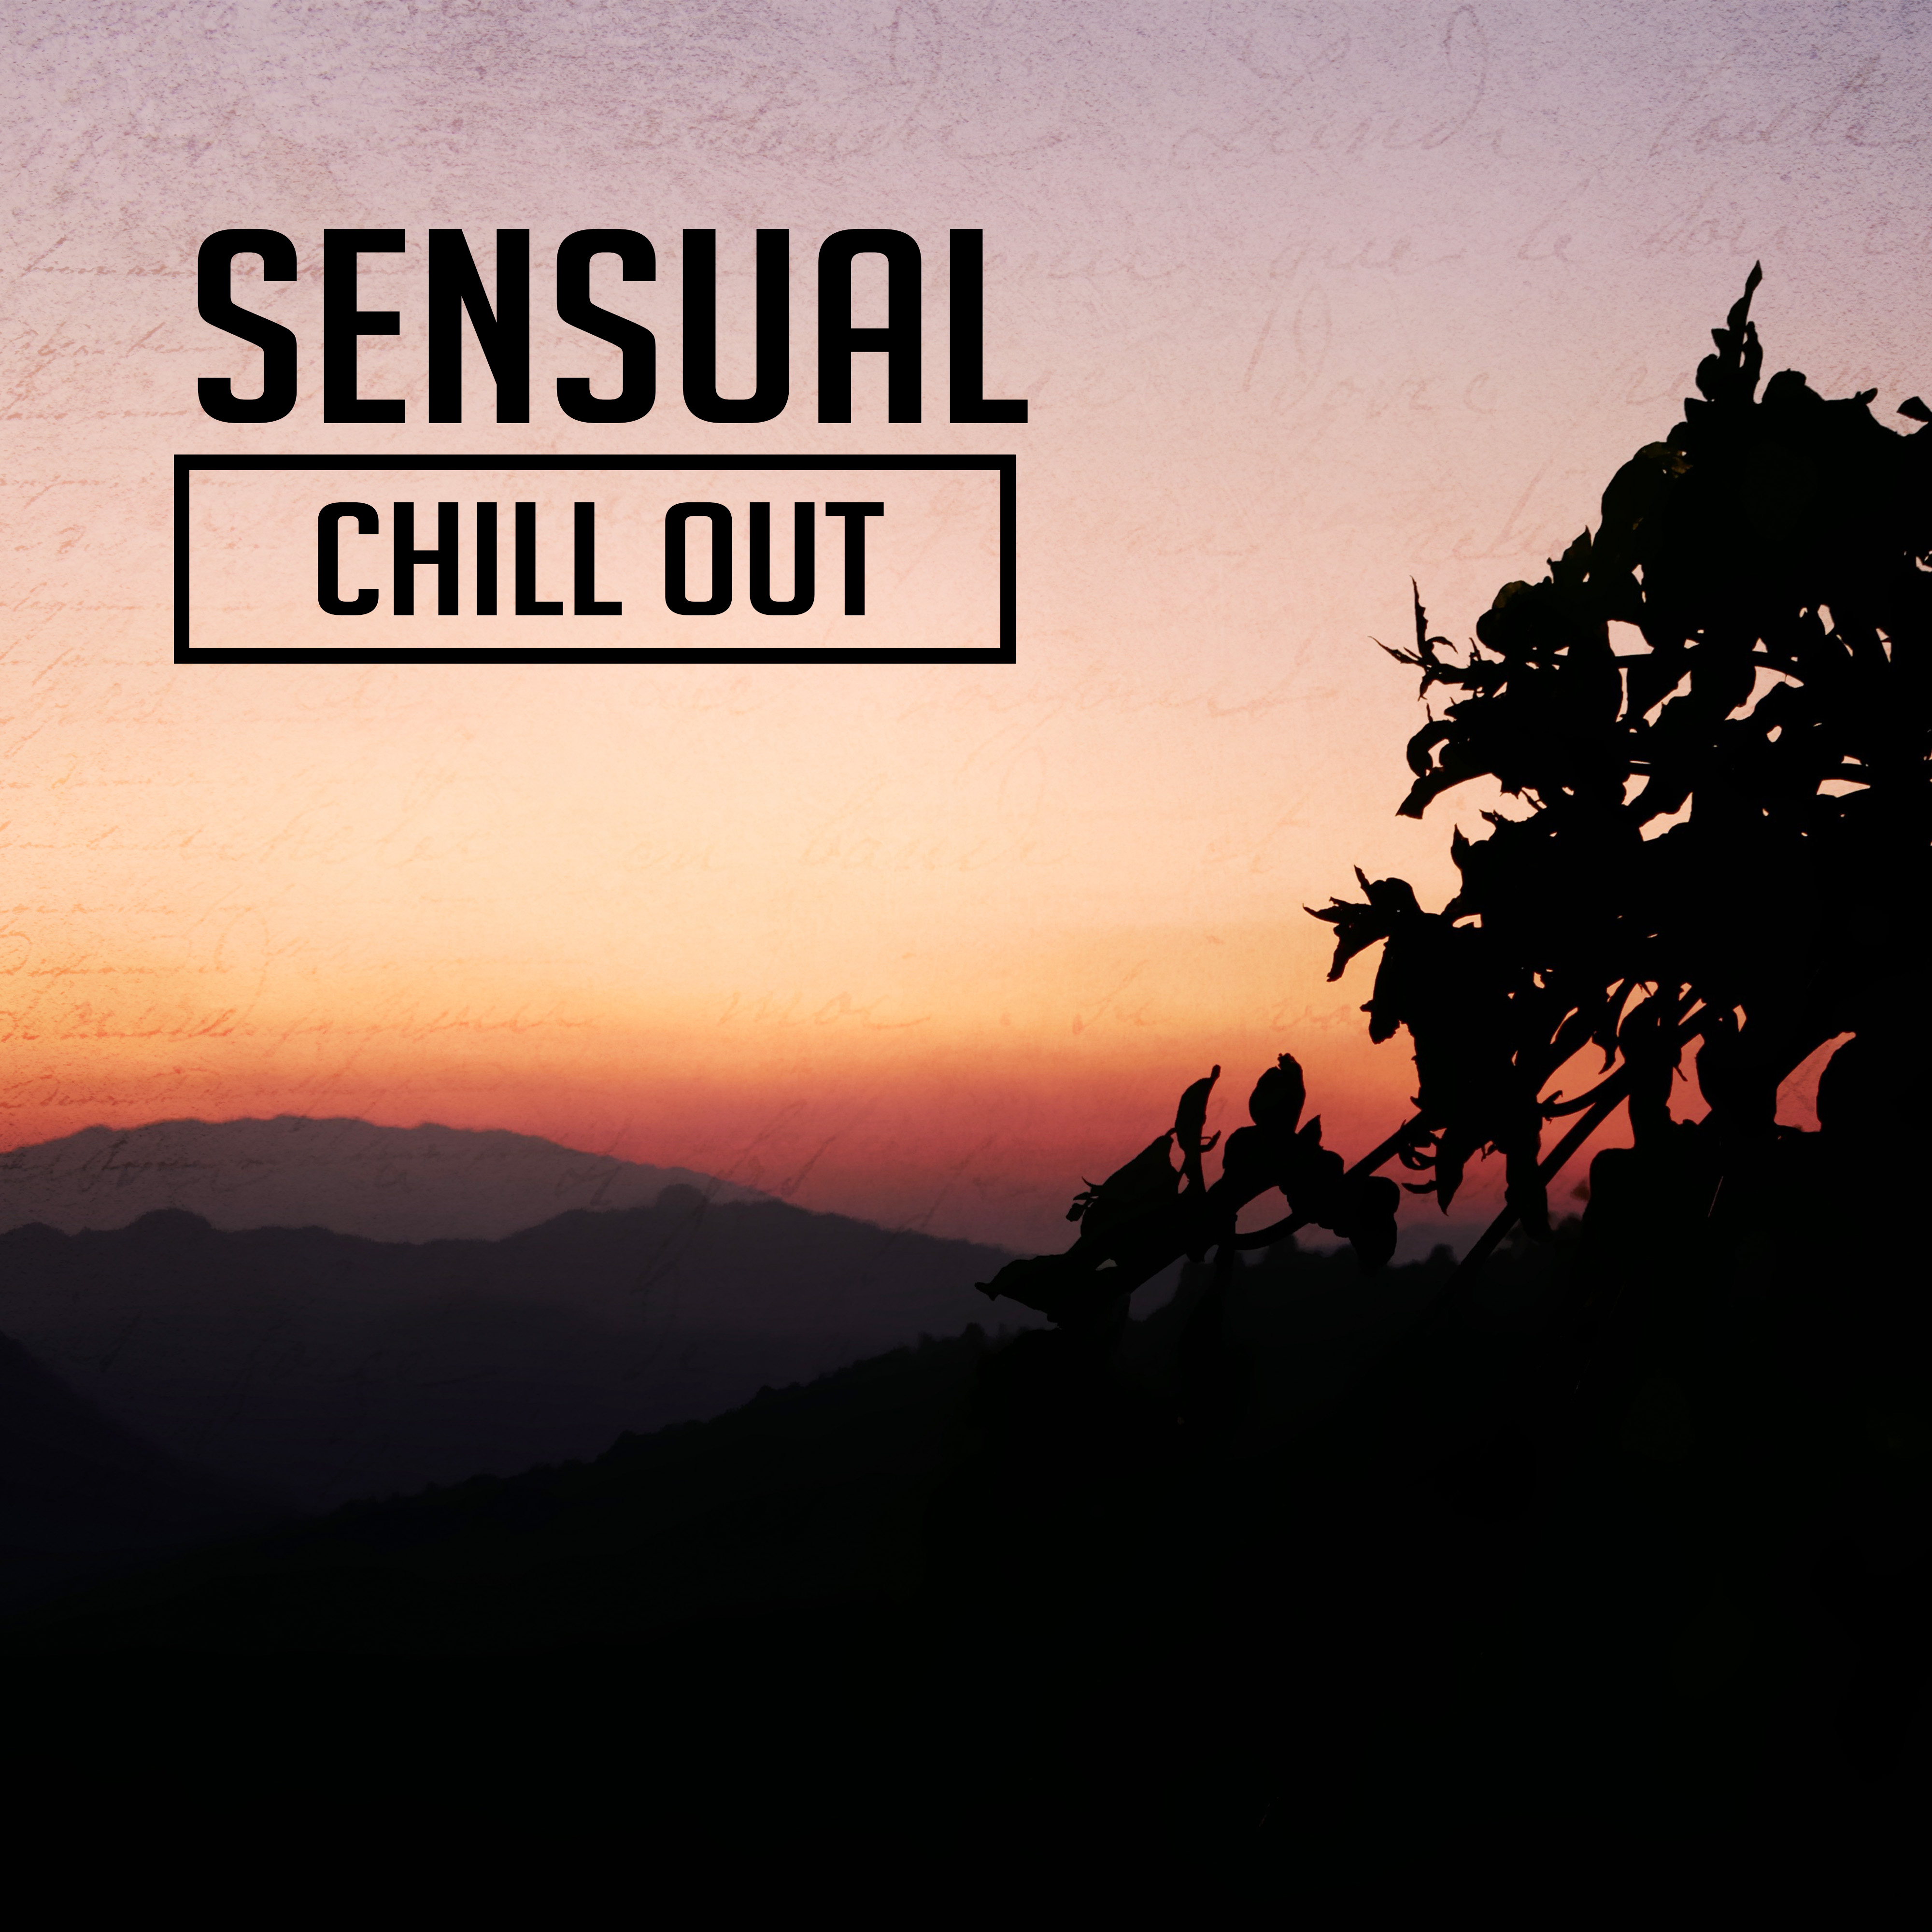 Sensual Chill Out – **** Vibes, Erotic Lounge, Beach Party, Summer Chill, Dance for Two, Total Relax, Holiday